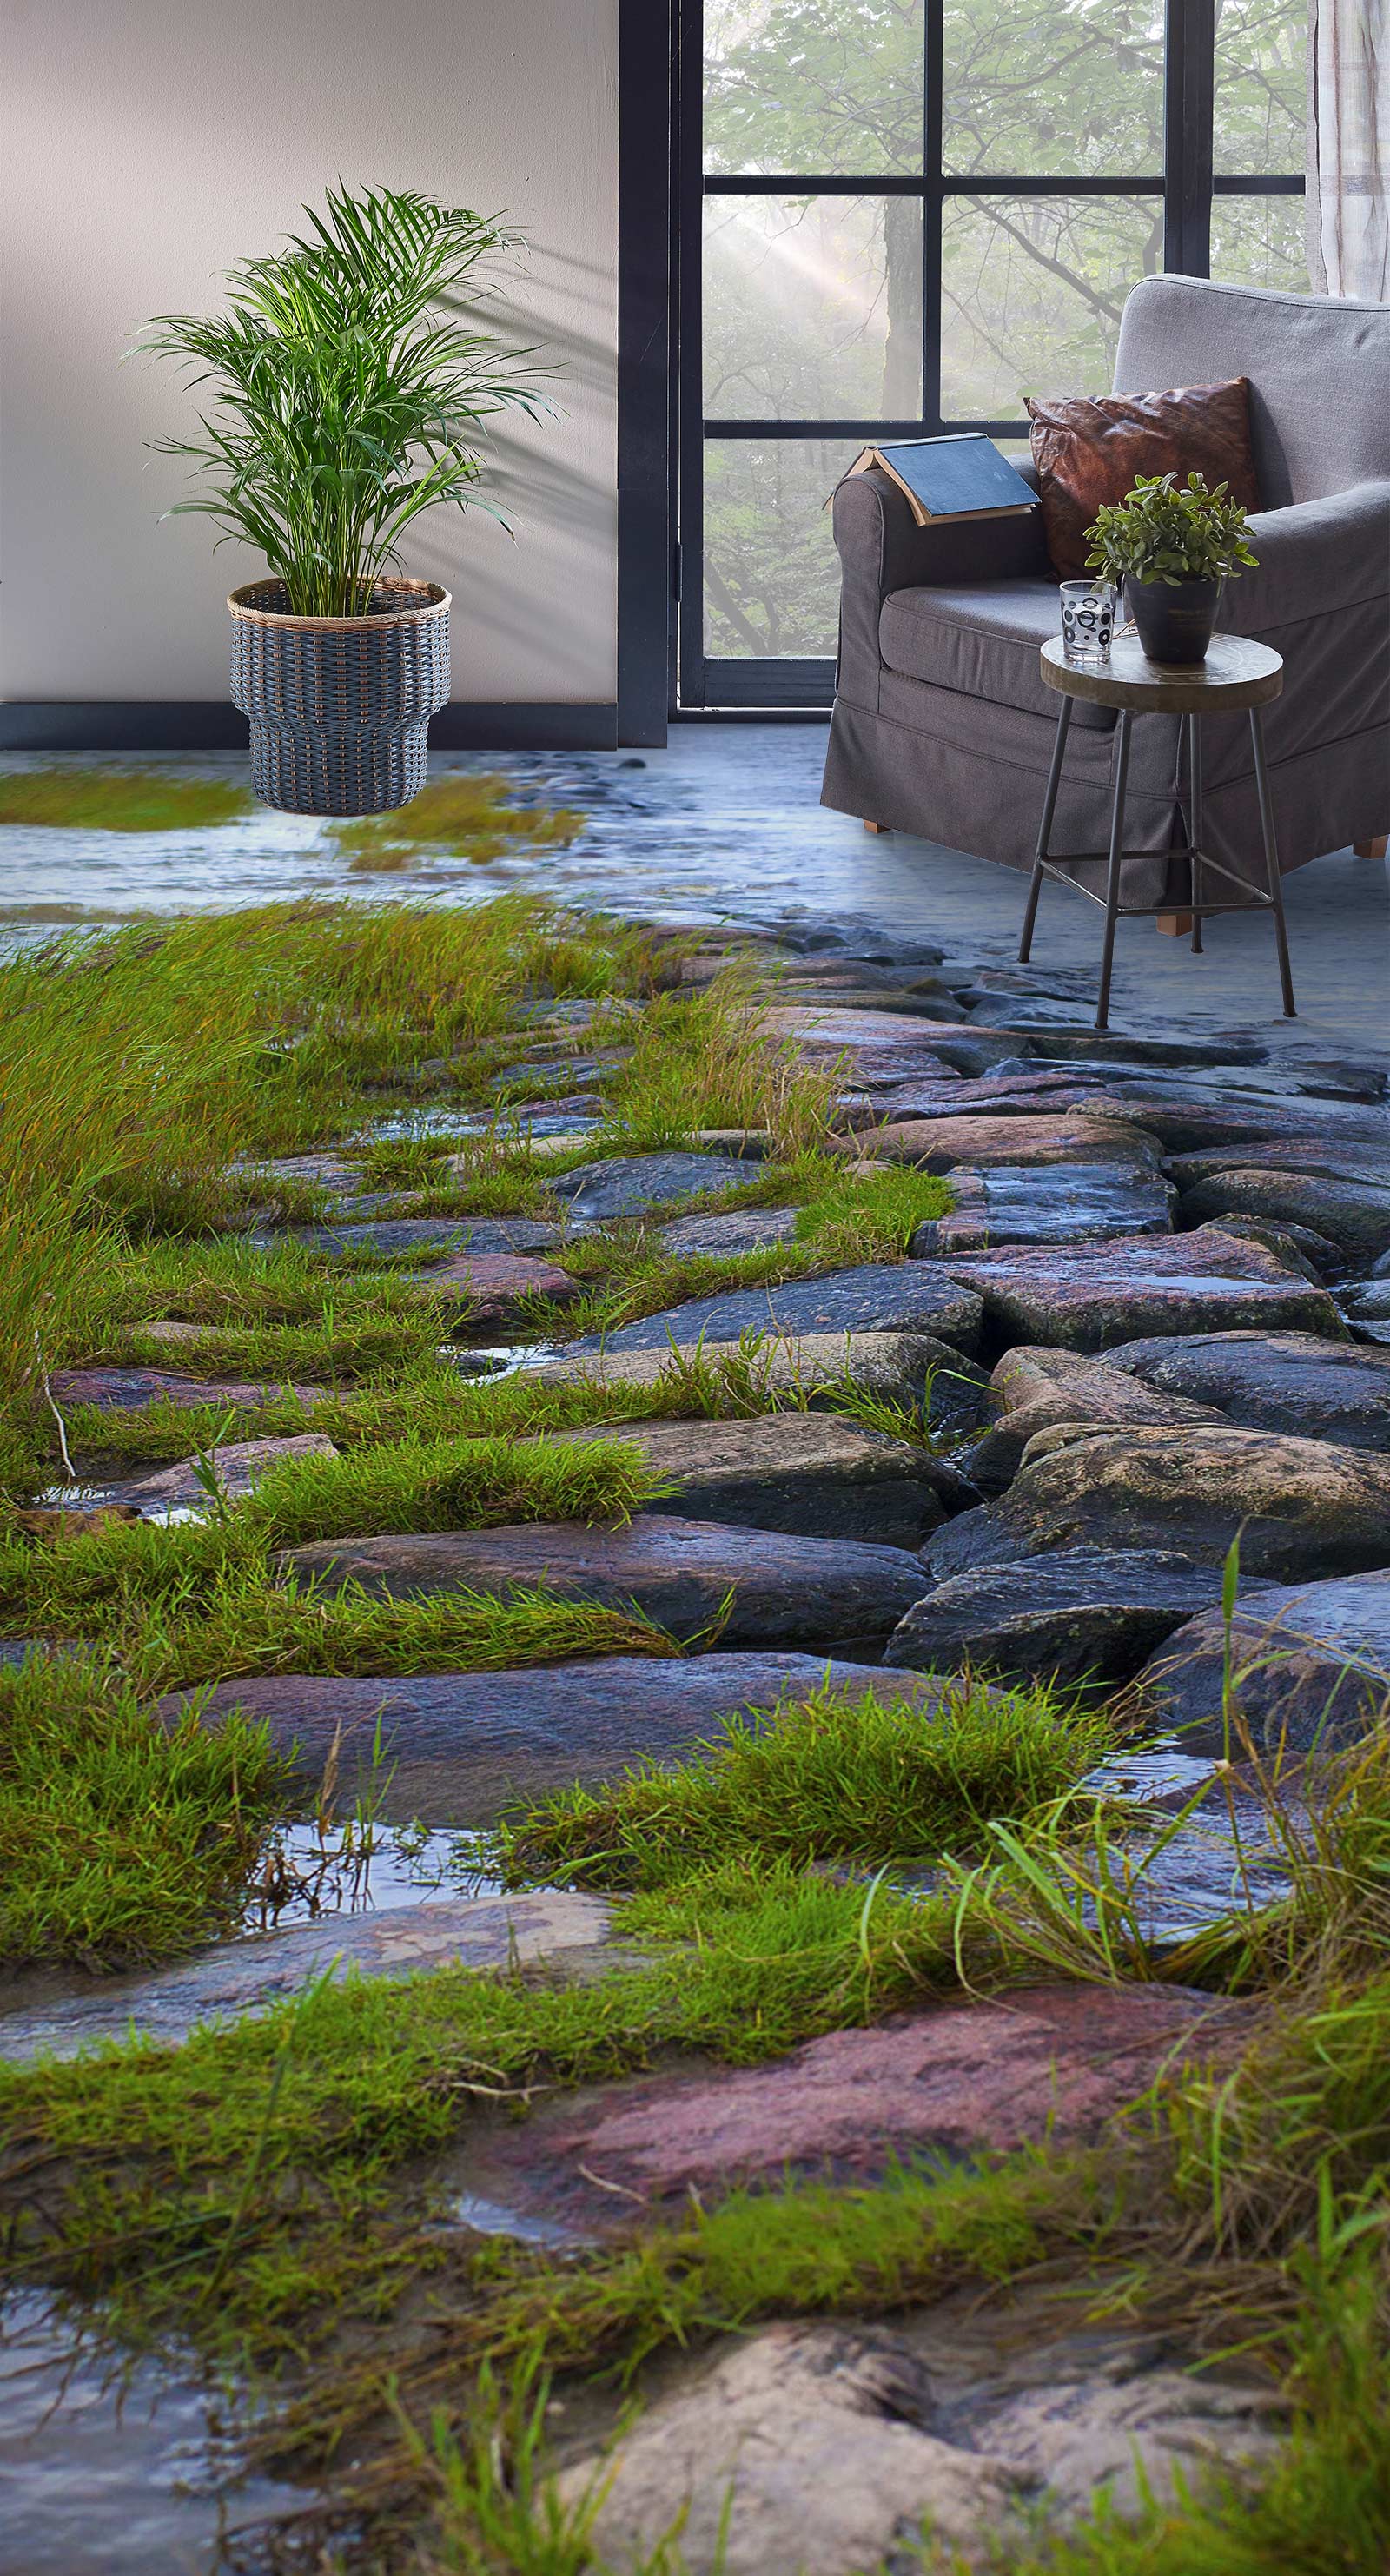 3D Grass Among The Stones 1099 Floor Mural  Wallpaper Murals Self-Adhesive Removable Print Epoxy